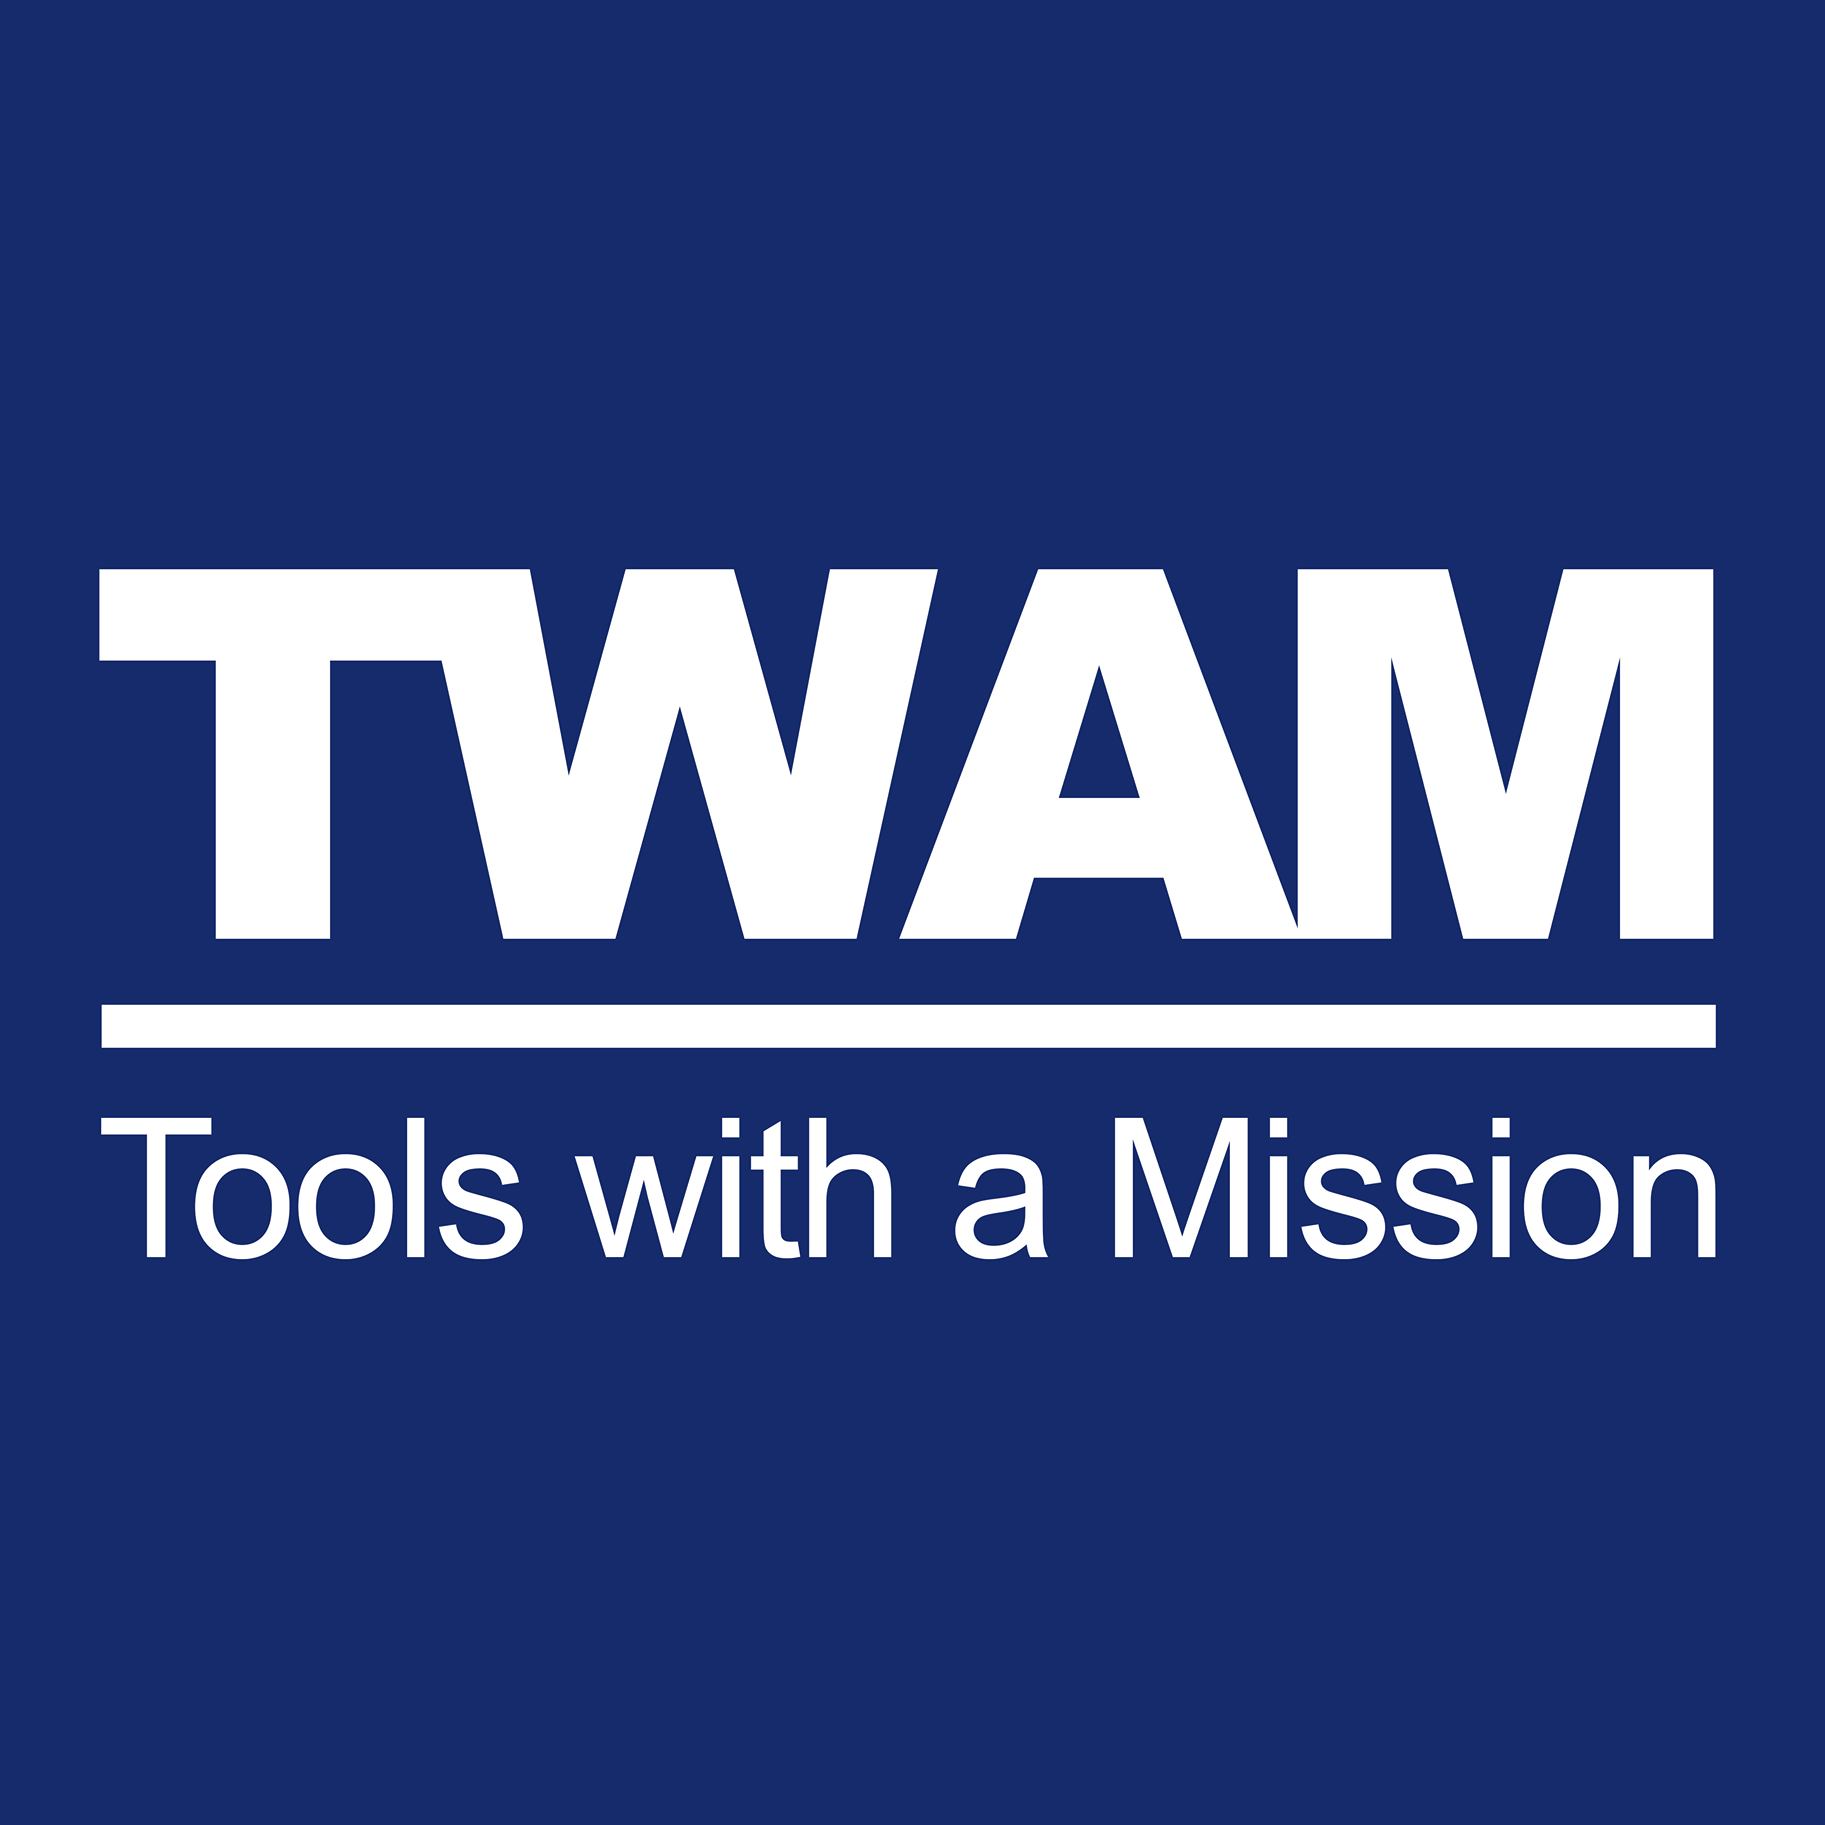 Tools with a Mission (TWAM)